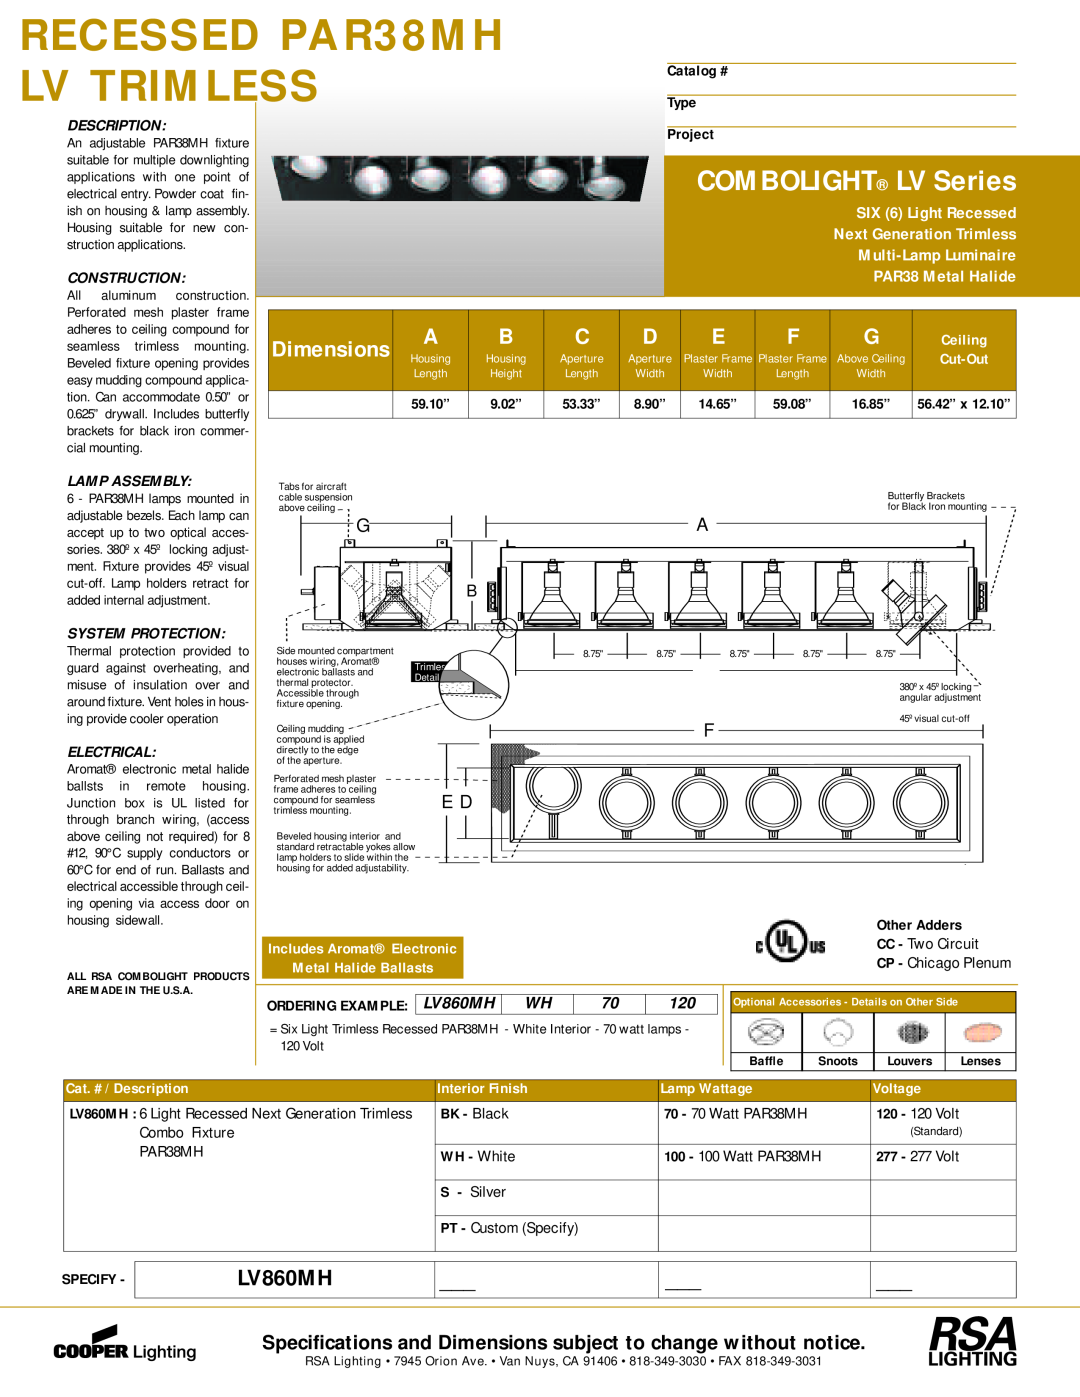 Cooper Lighting LV860MH dimensions RECESSED PAR38MH, Lv Trimless, COMBOLIGHT LV Series, Dimensions, SIX 6 Light Recessed 